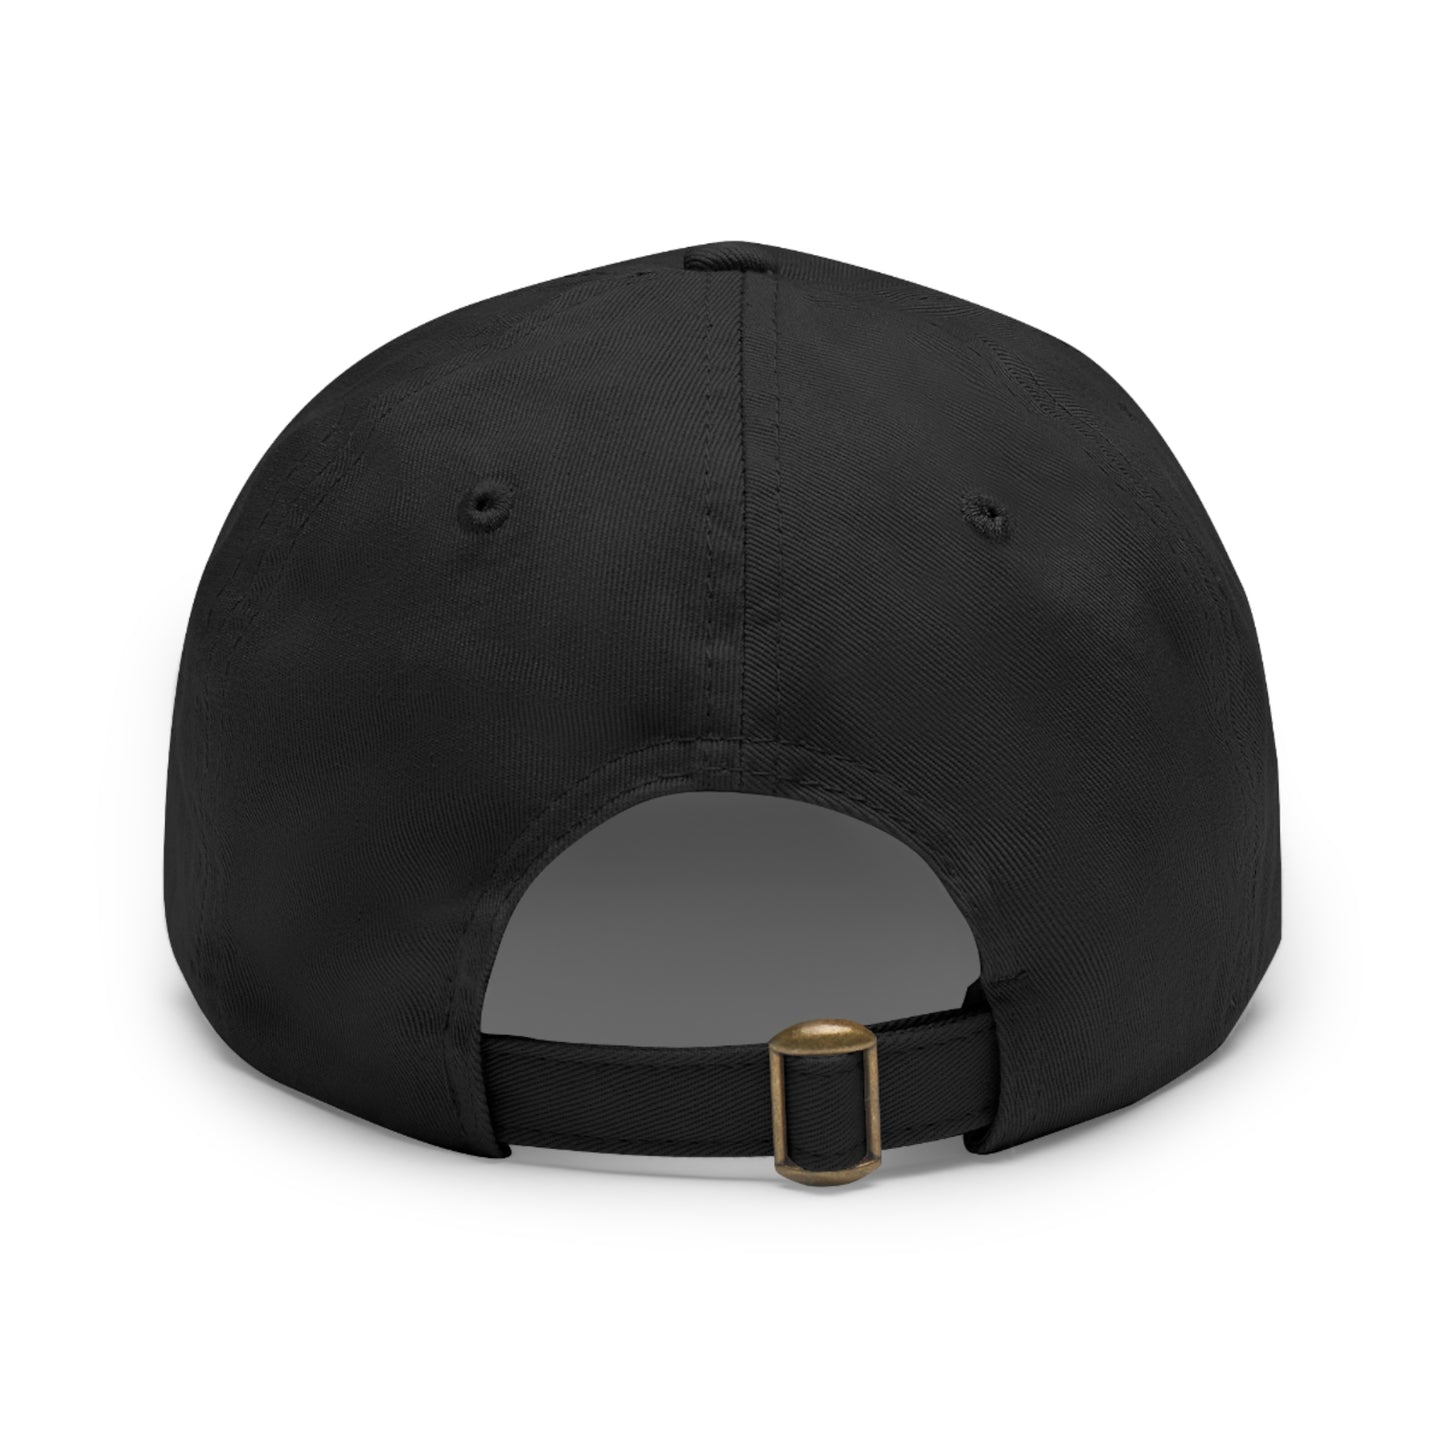 Coffee of the Cross - Dad Hat with Leather Patch (Rectangle)